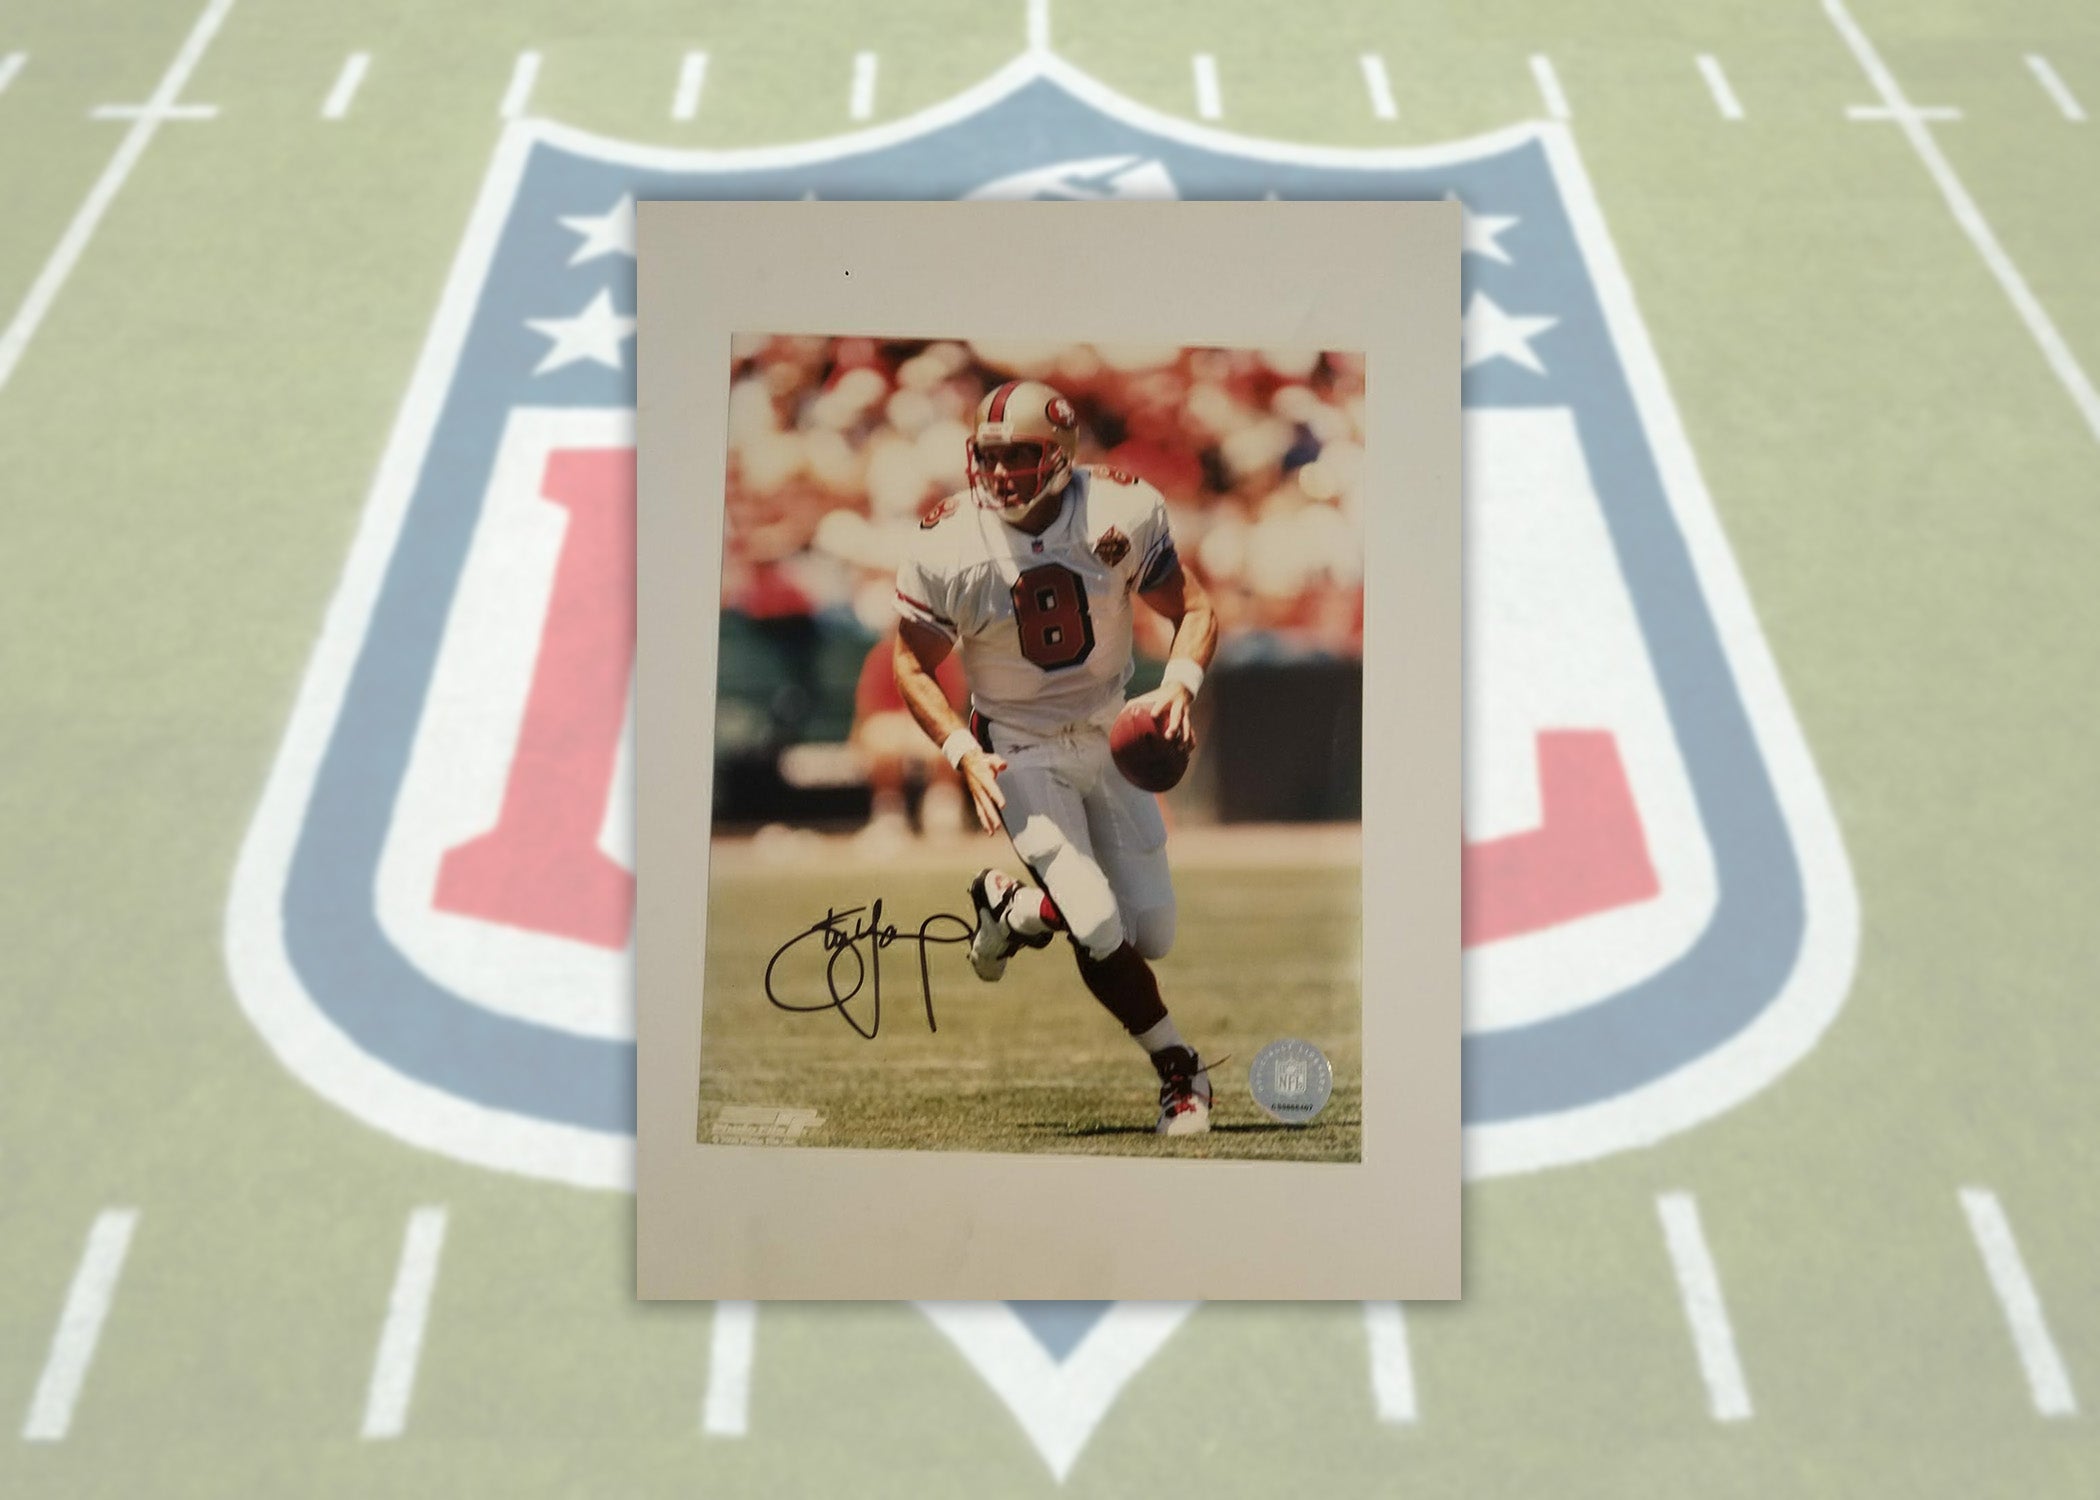 Steve Young San Francisco 49ers 8 by 10 signed with proof